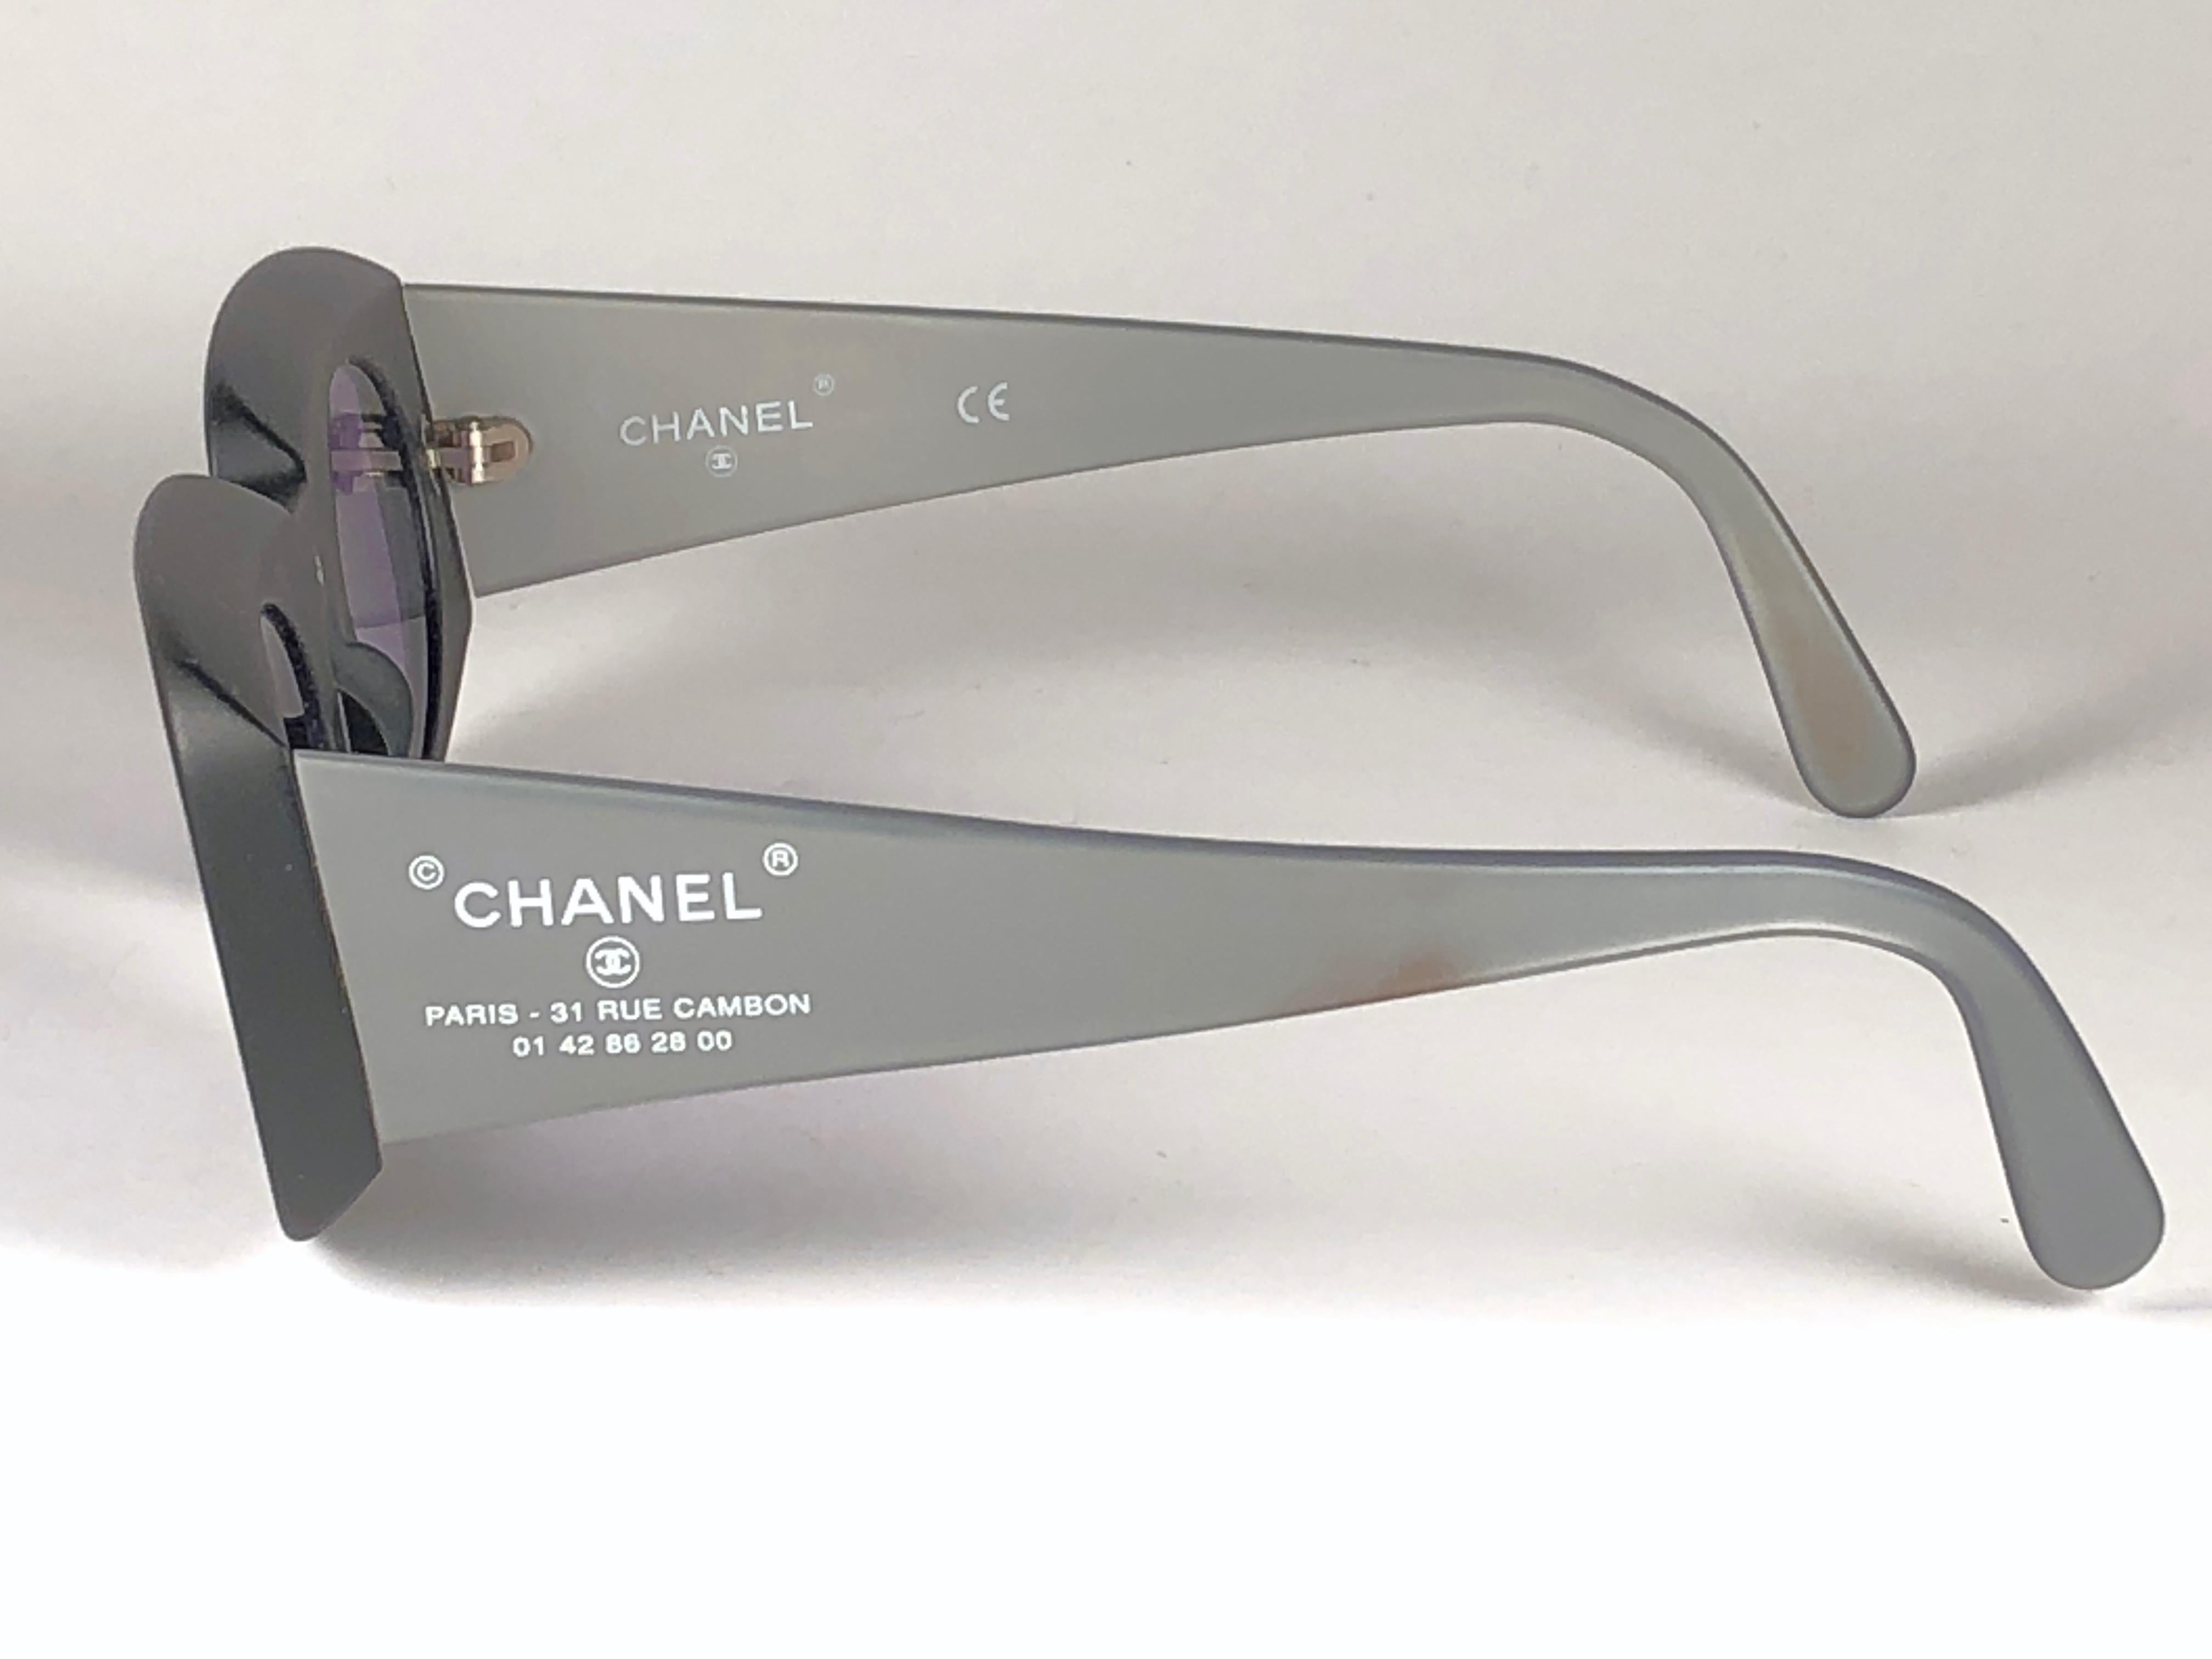 Chanel Vintage Camera Lens Black & Grey Sunglasses Made in Italy Collector Item 3